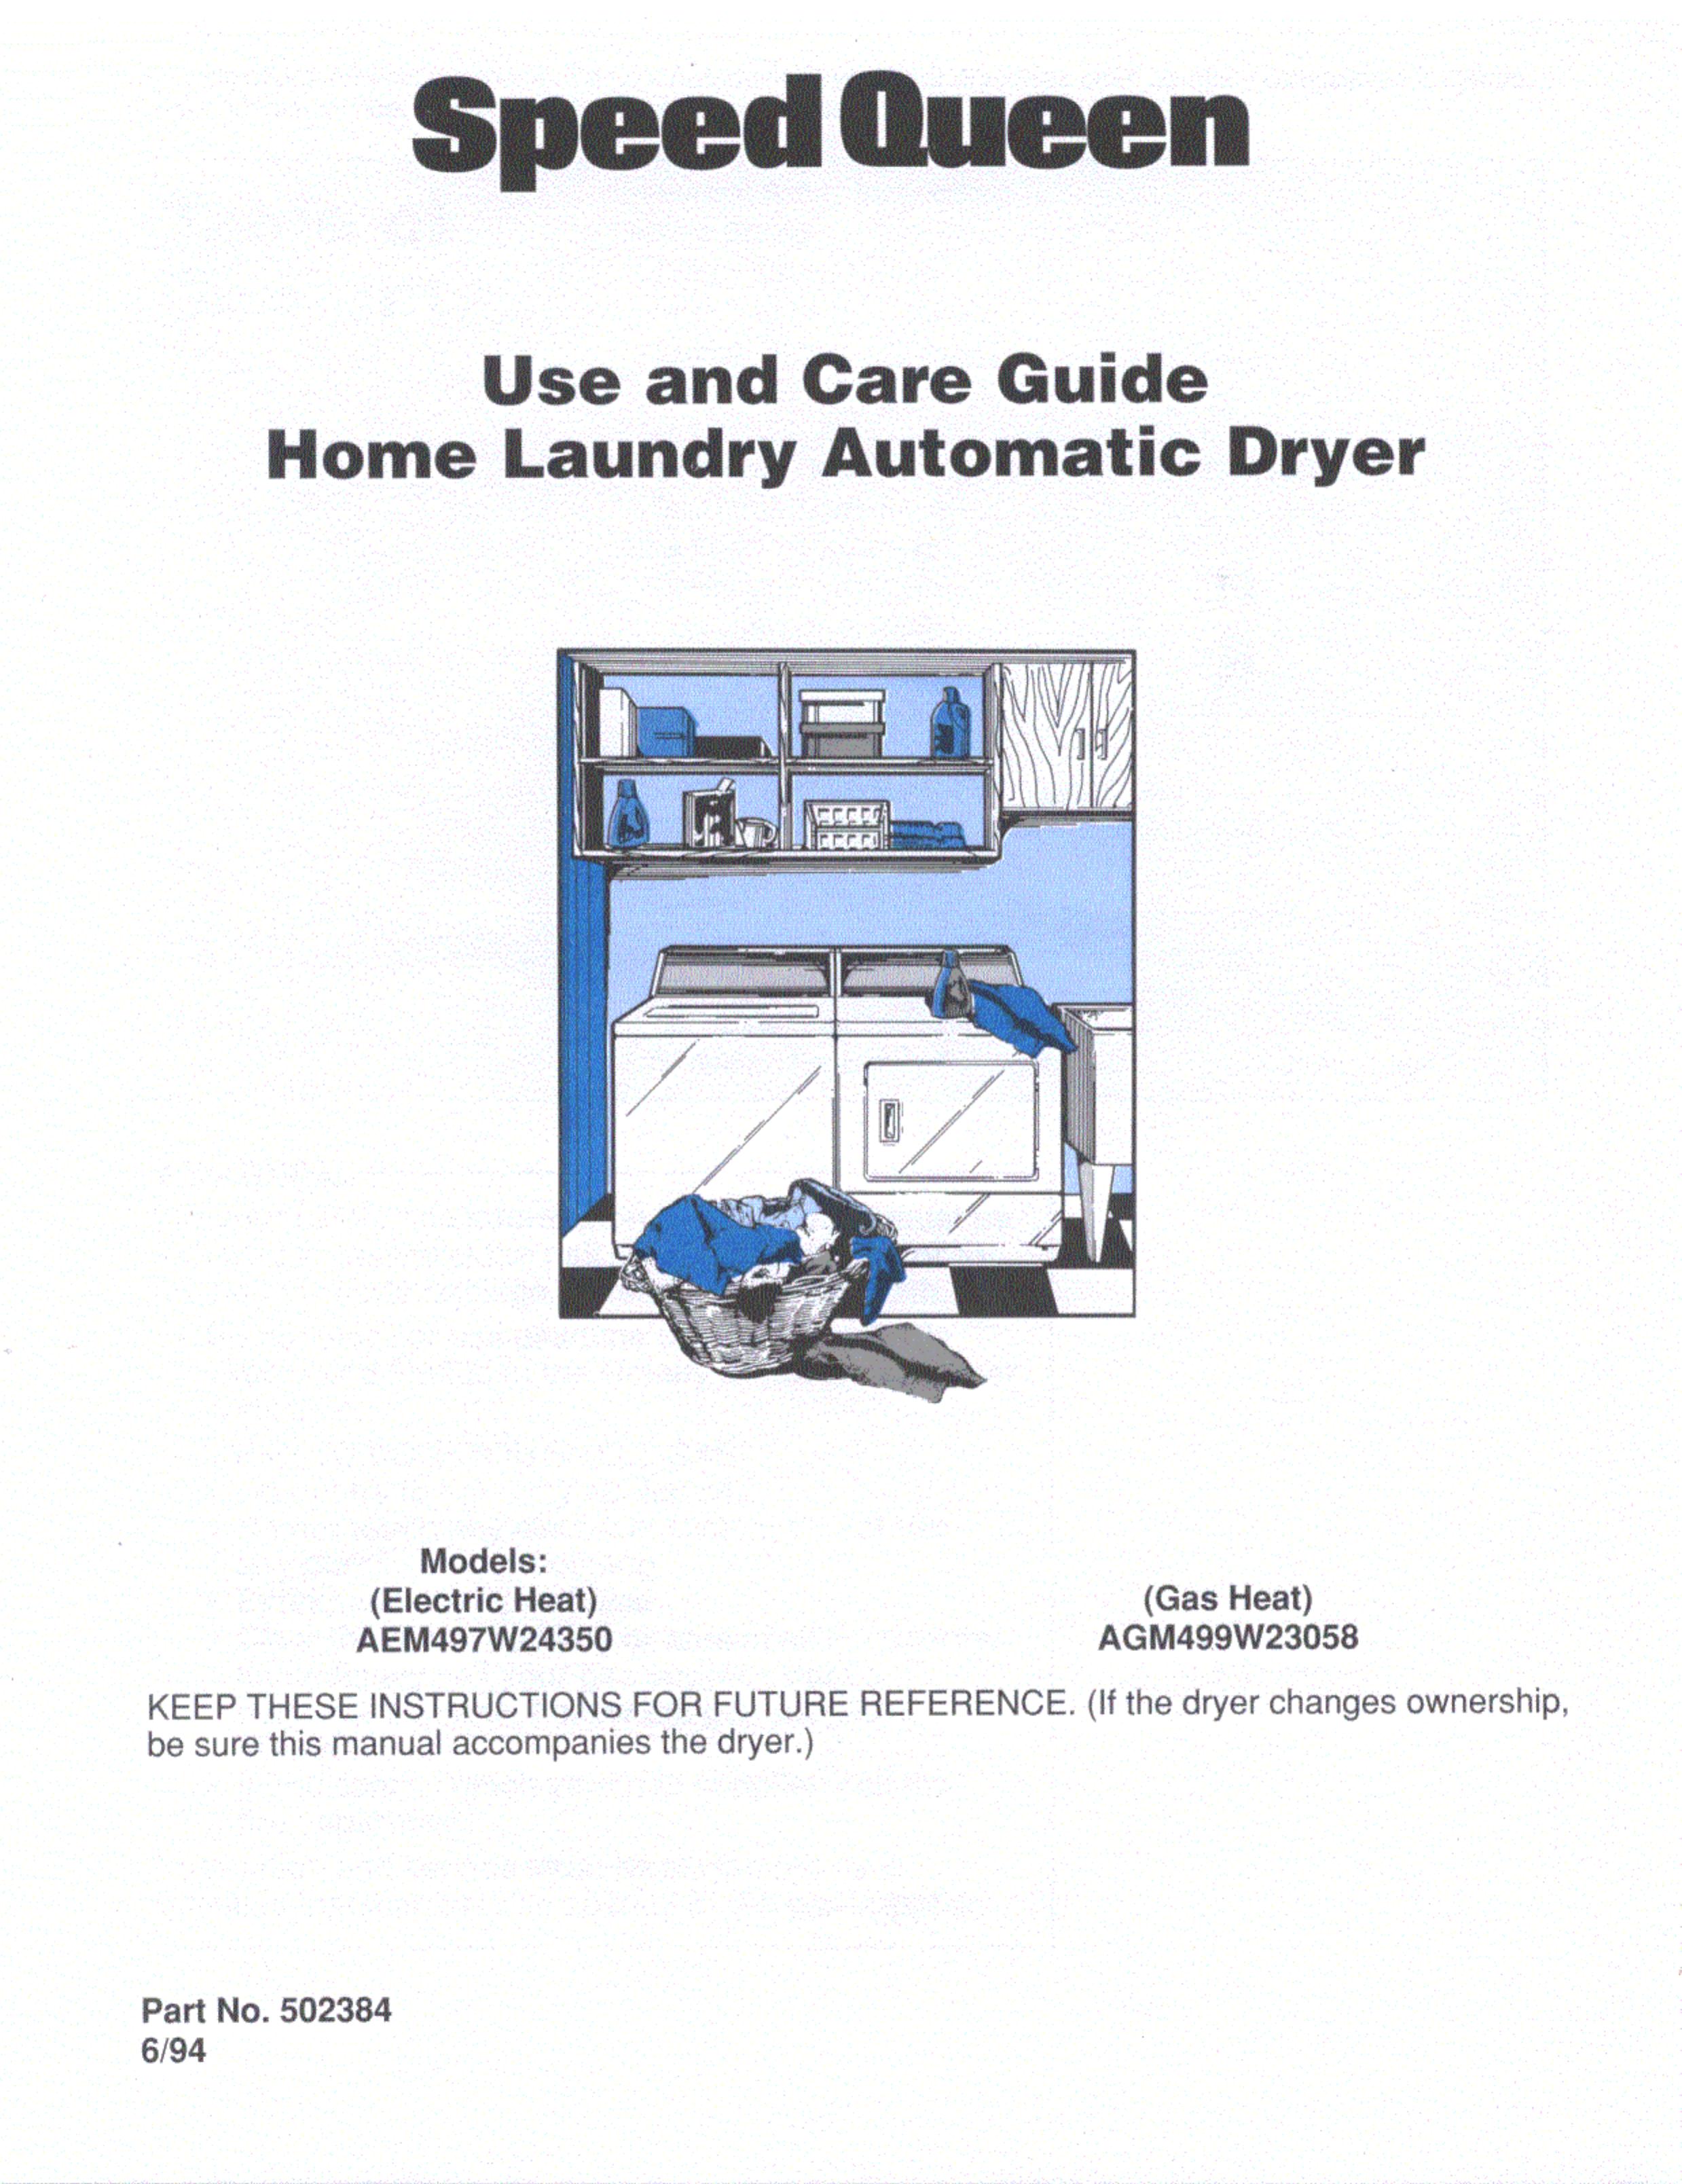 Speed Queen AGM499W23058 Clothes Dryer User Manual